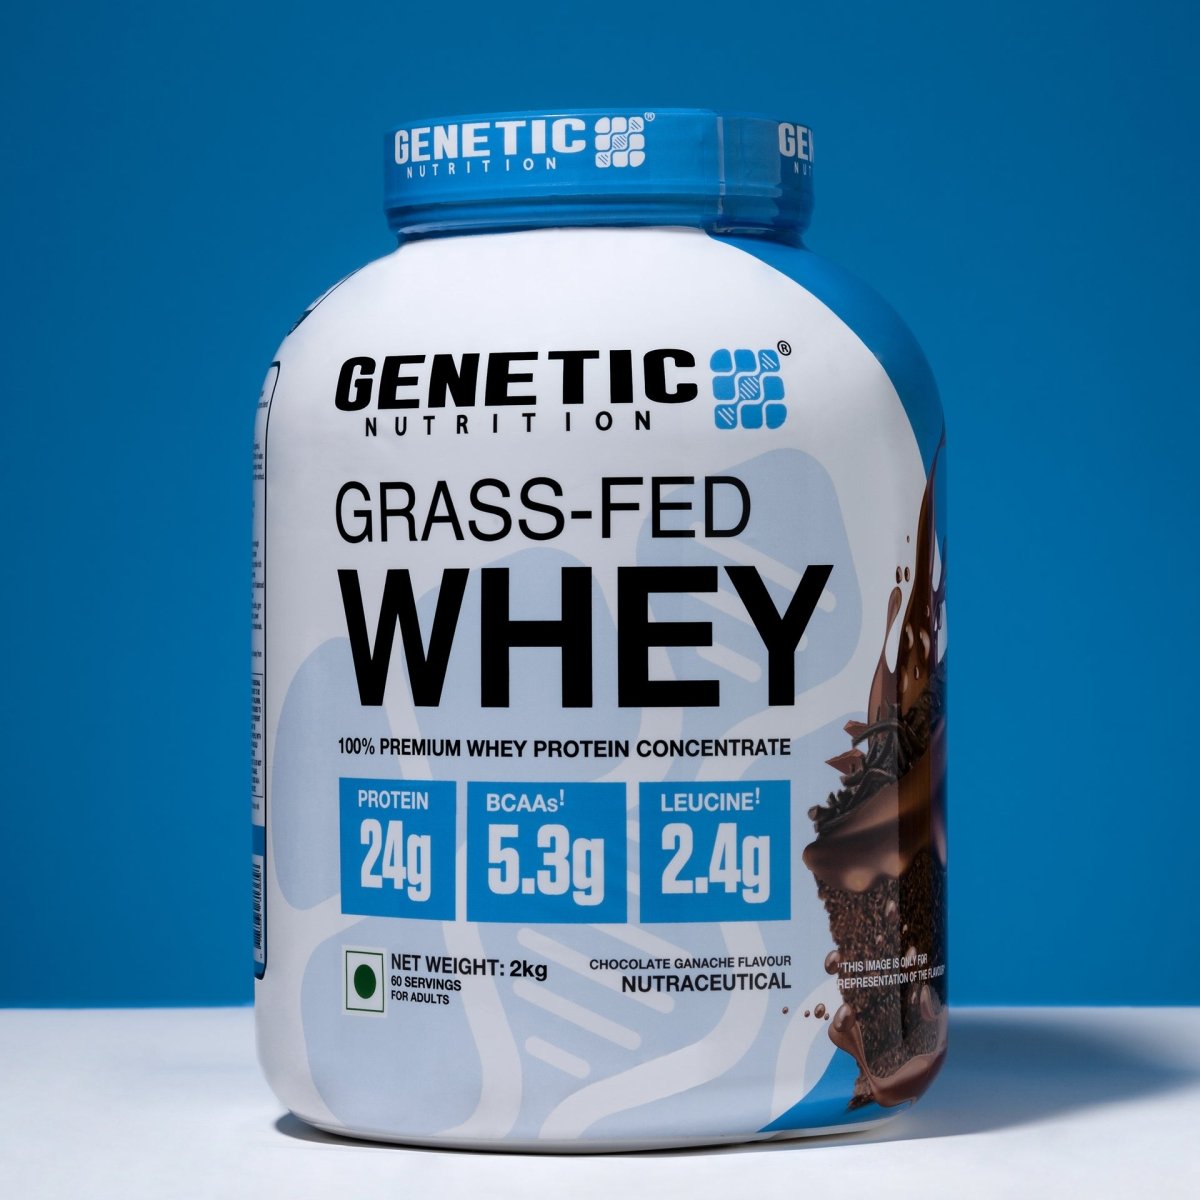 Grass-Fed Whey | Whey Protein Concentrate Powder - Genetic Nutrition